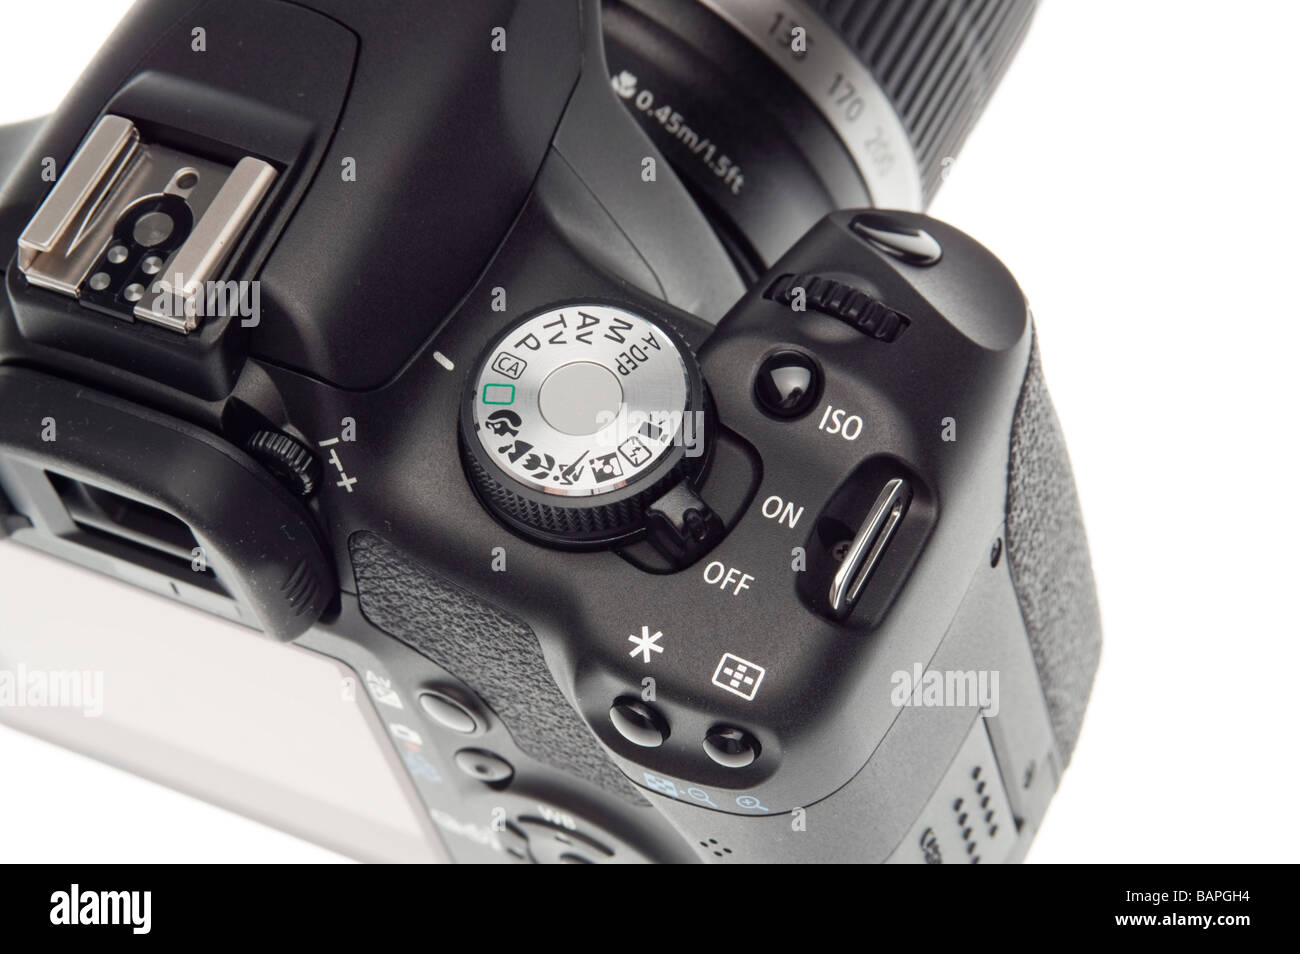 Digital SLR camera Canon EOS 500D HD video with zoom lens - retouched to  remove Canon logo and markings Stock Photo - Alamy